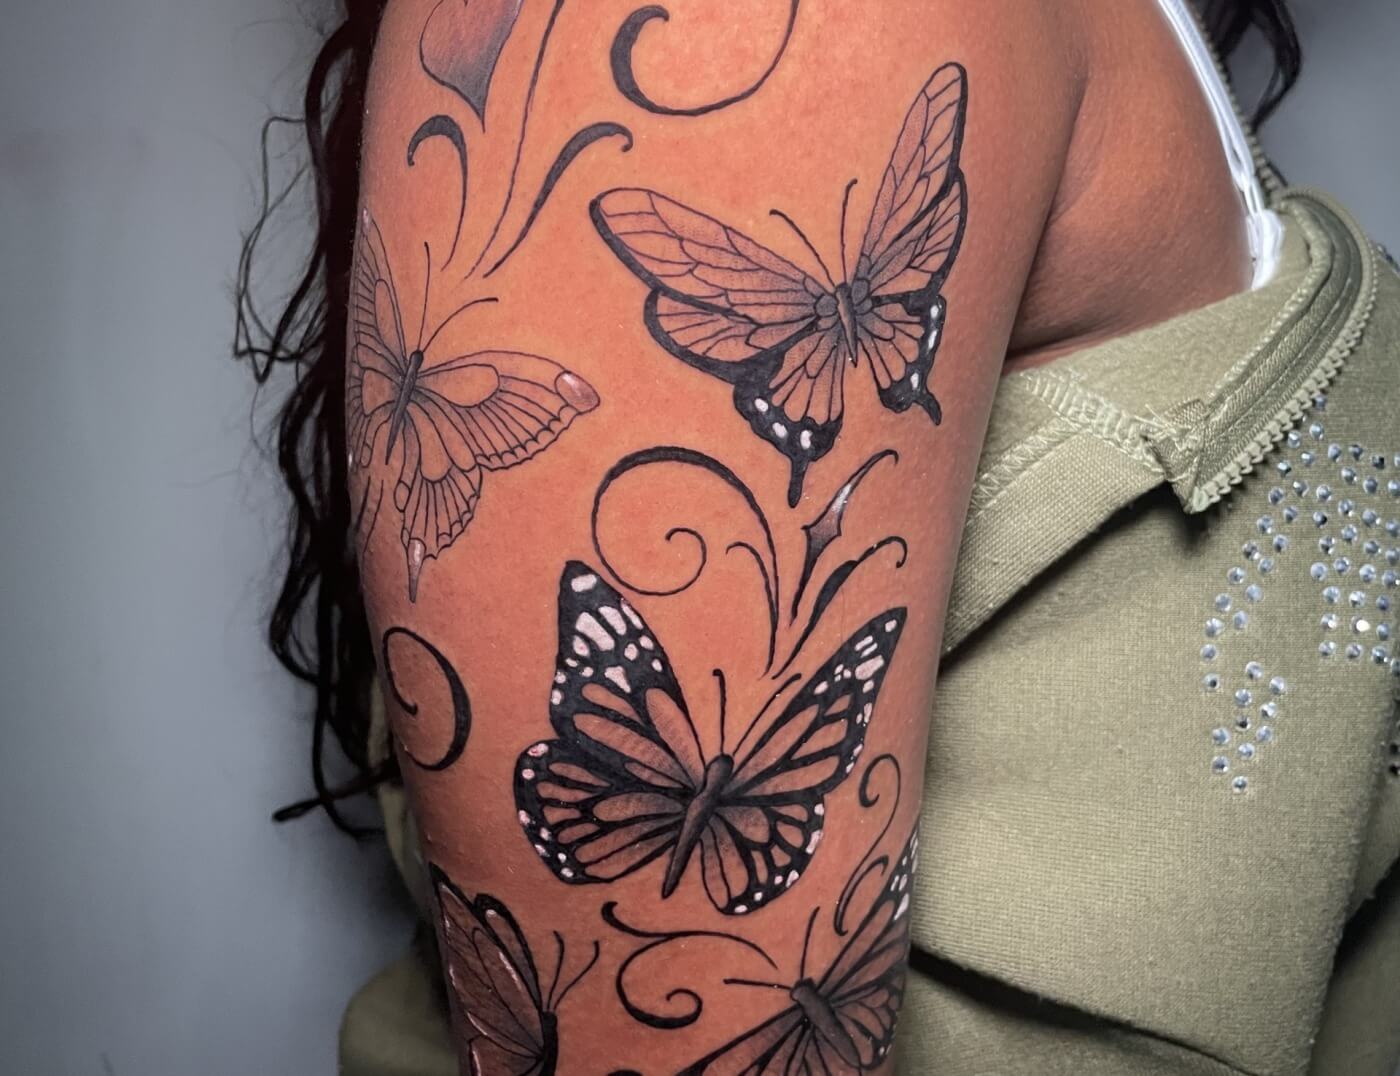 Butterfly tattoo by Lyric TheArtist at Iron Palm Tattoos in downtown Atlanta. What do you think? Let us know in the comments. We're open late night until 2 A.M. and located conveniently close to Mercedes-Benz stadium and State Farm Arena downtown. Call 404-973-7828 or stop by for a free consultation. #colortattooartist #castleberry #art #atlink #atlantatattoo #atlantaink #tattoolife #ironpalmtattoos #tattoostudio #atlantatatt #blackowned #colortattoo #atlantatattooshop #tattooideas #realistictattoo #americantattoo #georgiatattoo #inkedlife #atlantatattooartist #atlien #tattooartist #atlantaart #downtownatlanta #tattoodesign #atlantaartist #georgiatattooartist #butterflytattoo #insecttattoo